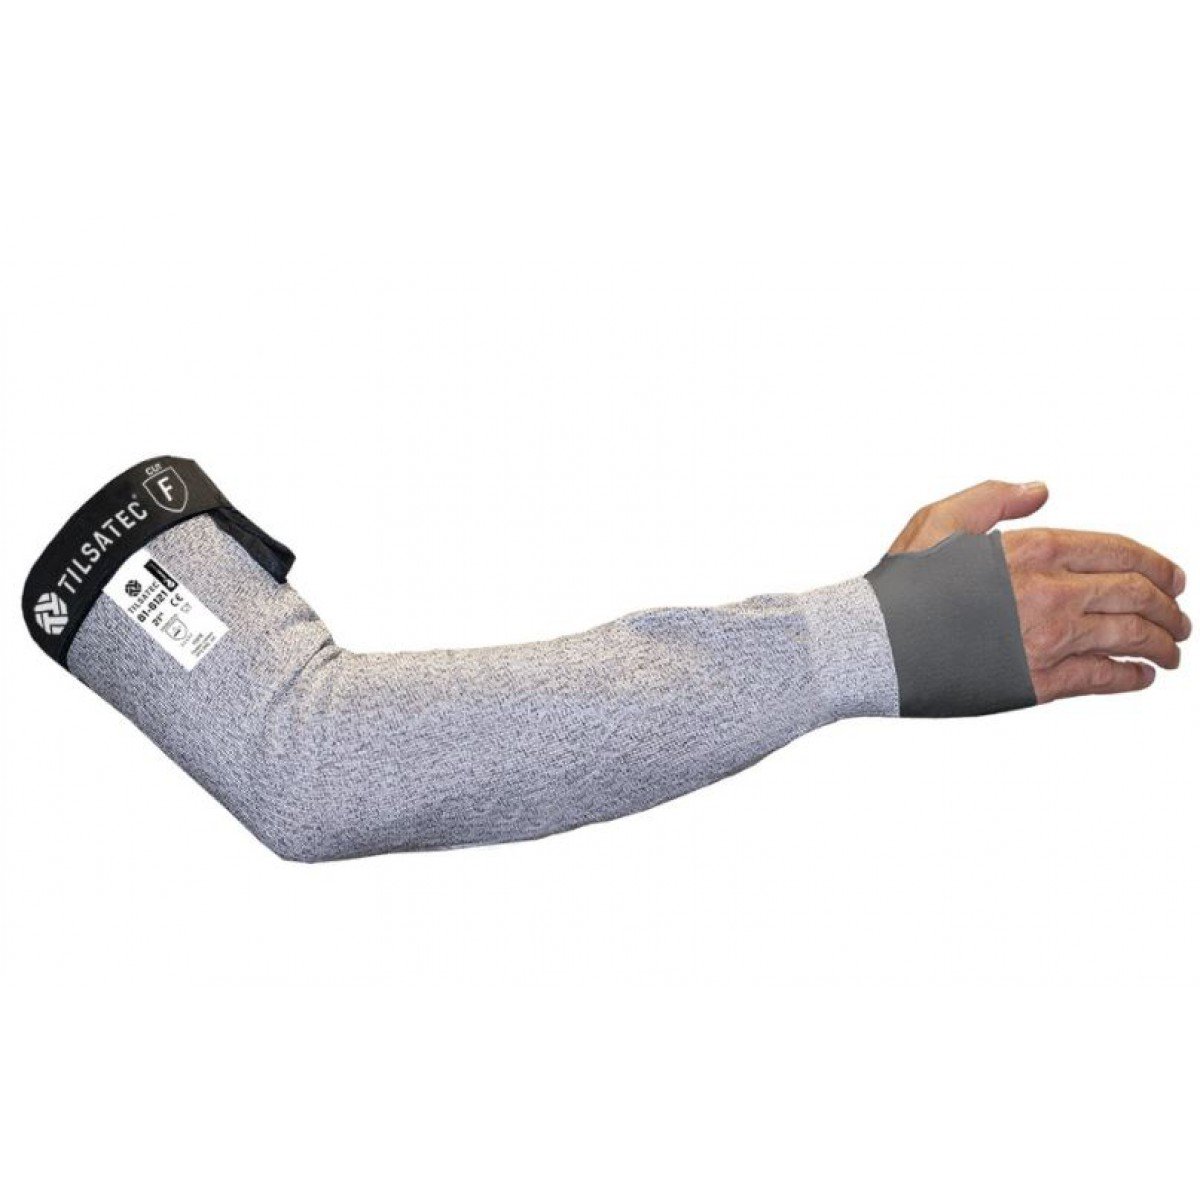 Tilsatec Cut Resistant Level F Antimicrobial Lightweight Food Glove